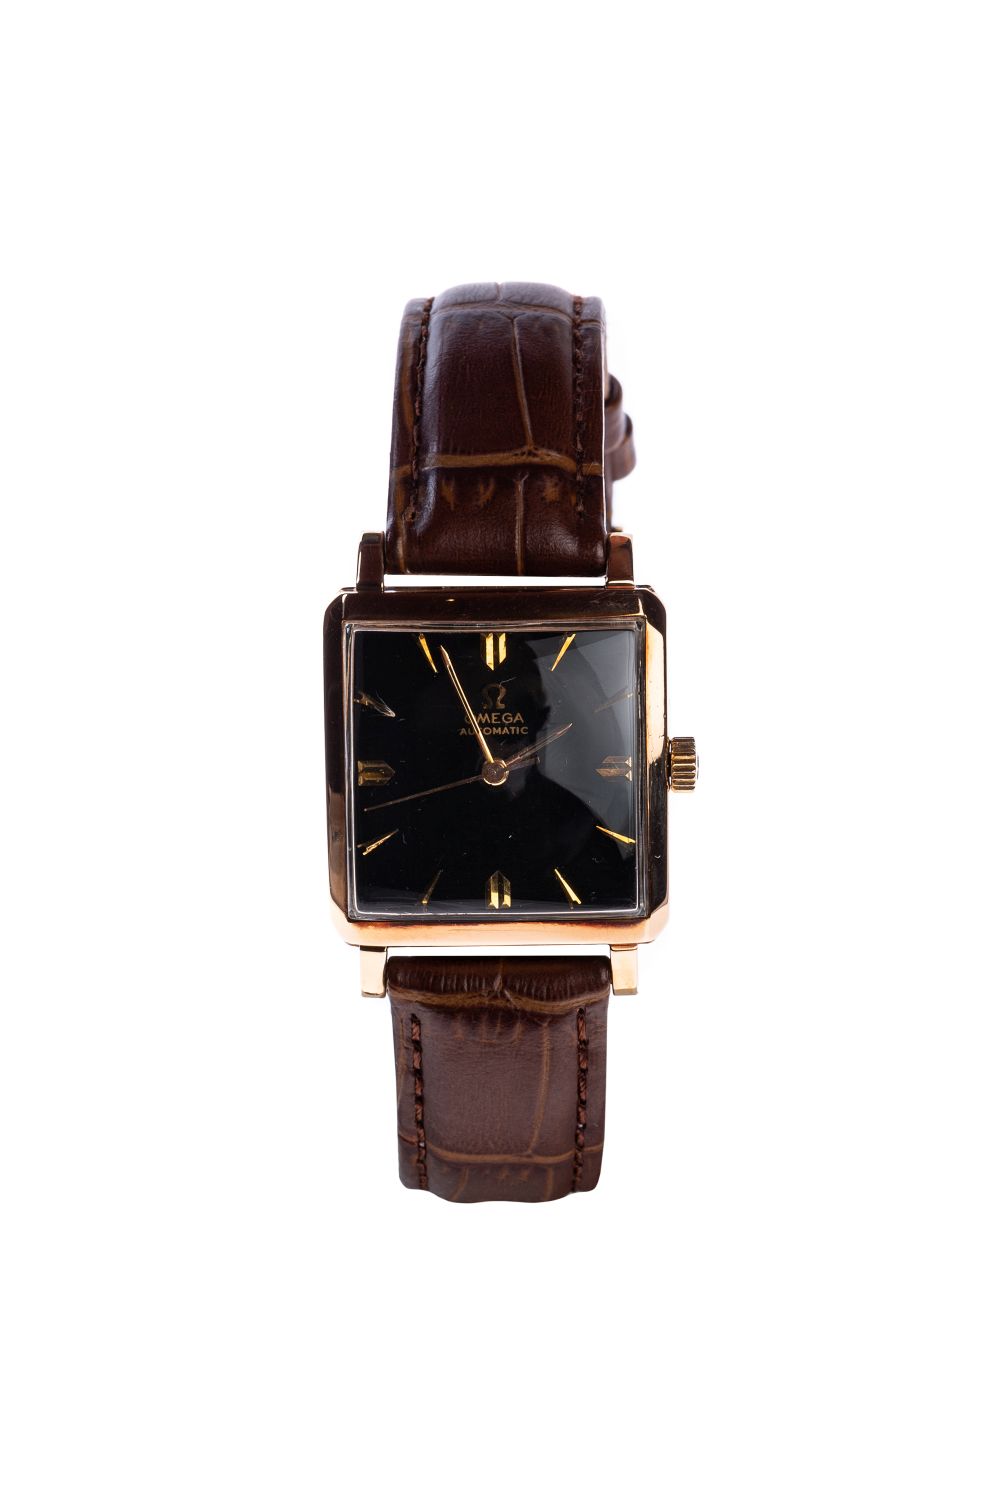 Vintage Omega in red gold60s vintage Omega with 18kt gold case, the black painted dial is with